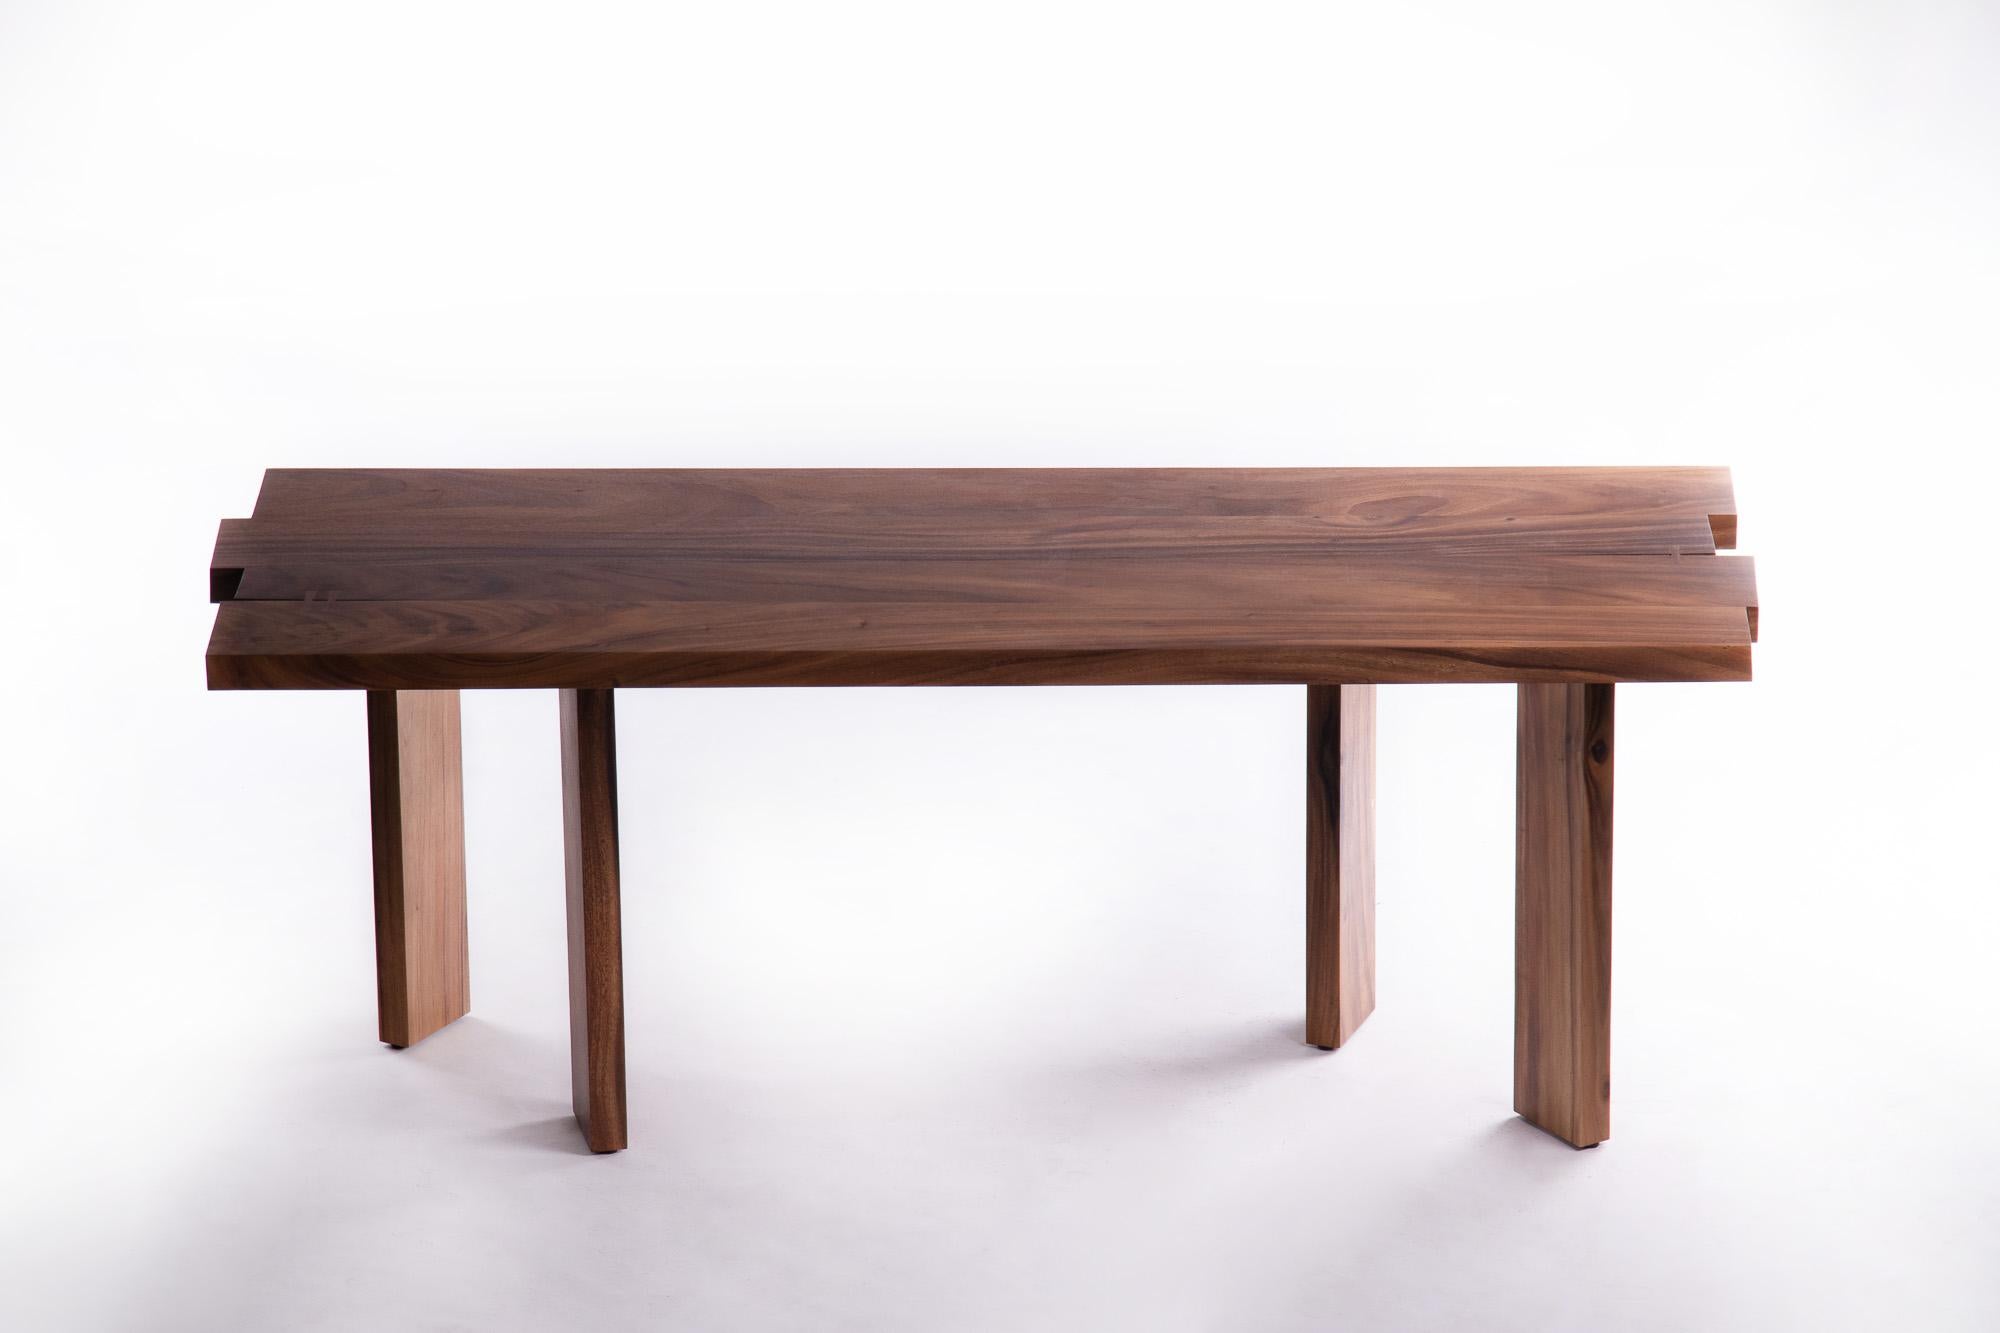 Hand-Crafted Mesa Table 200cm, Natural Acacia Wood For Sale